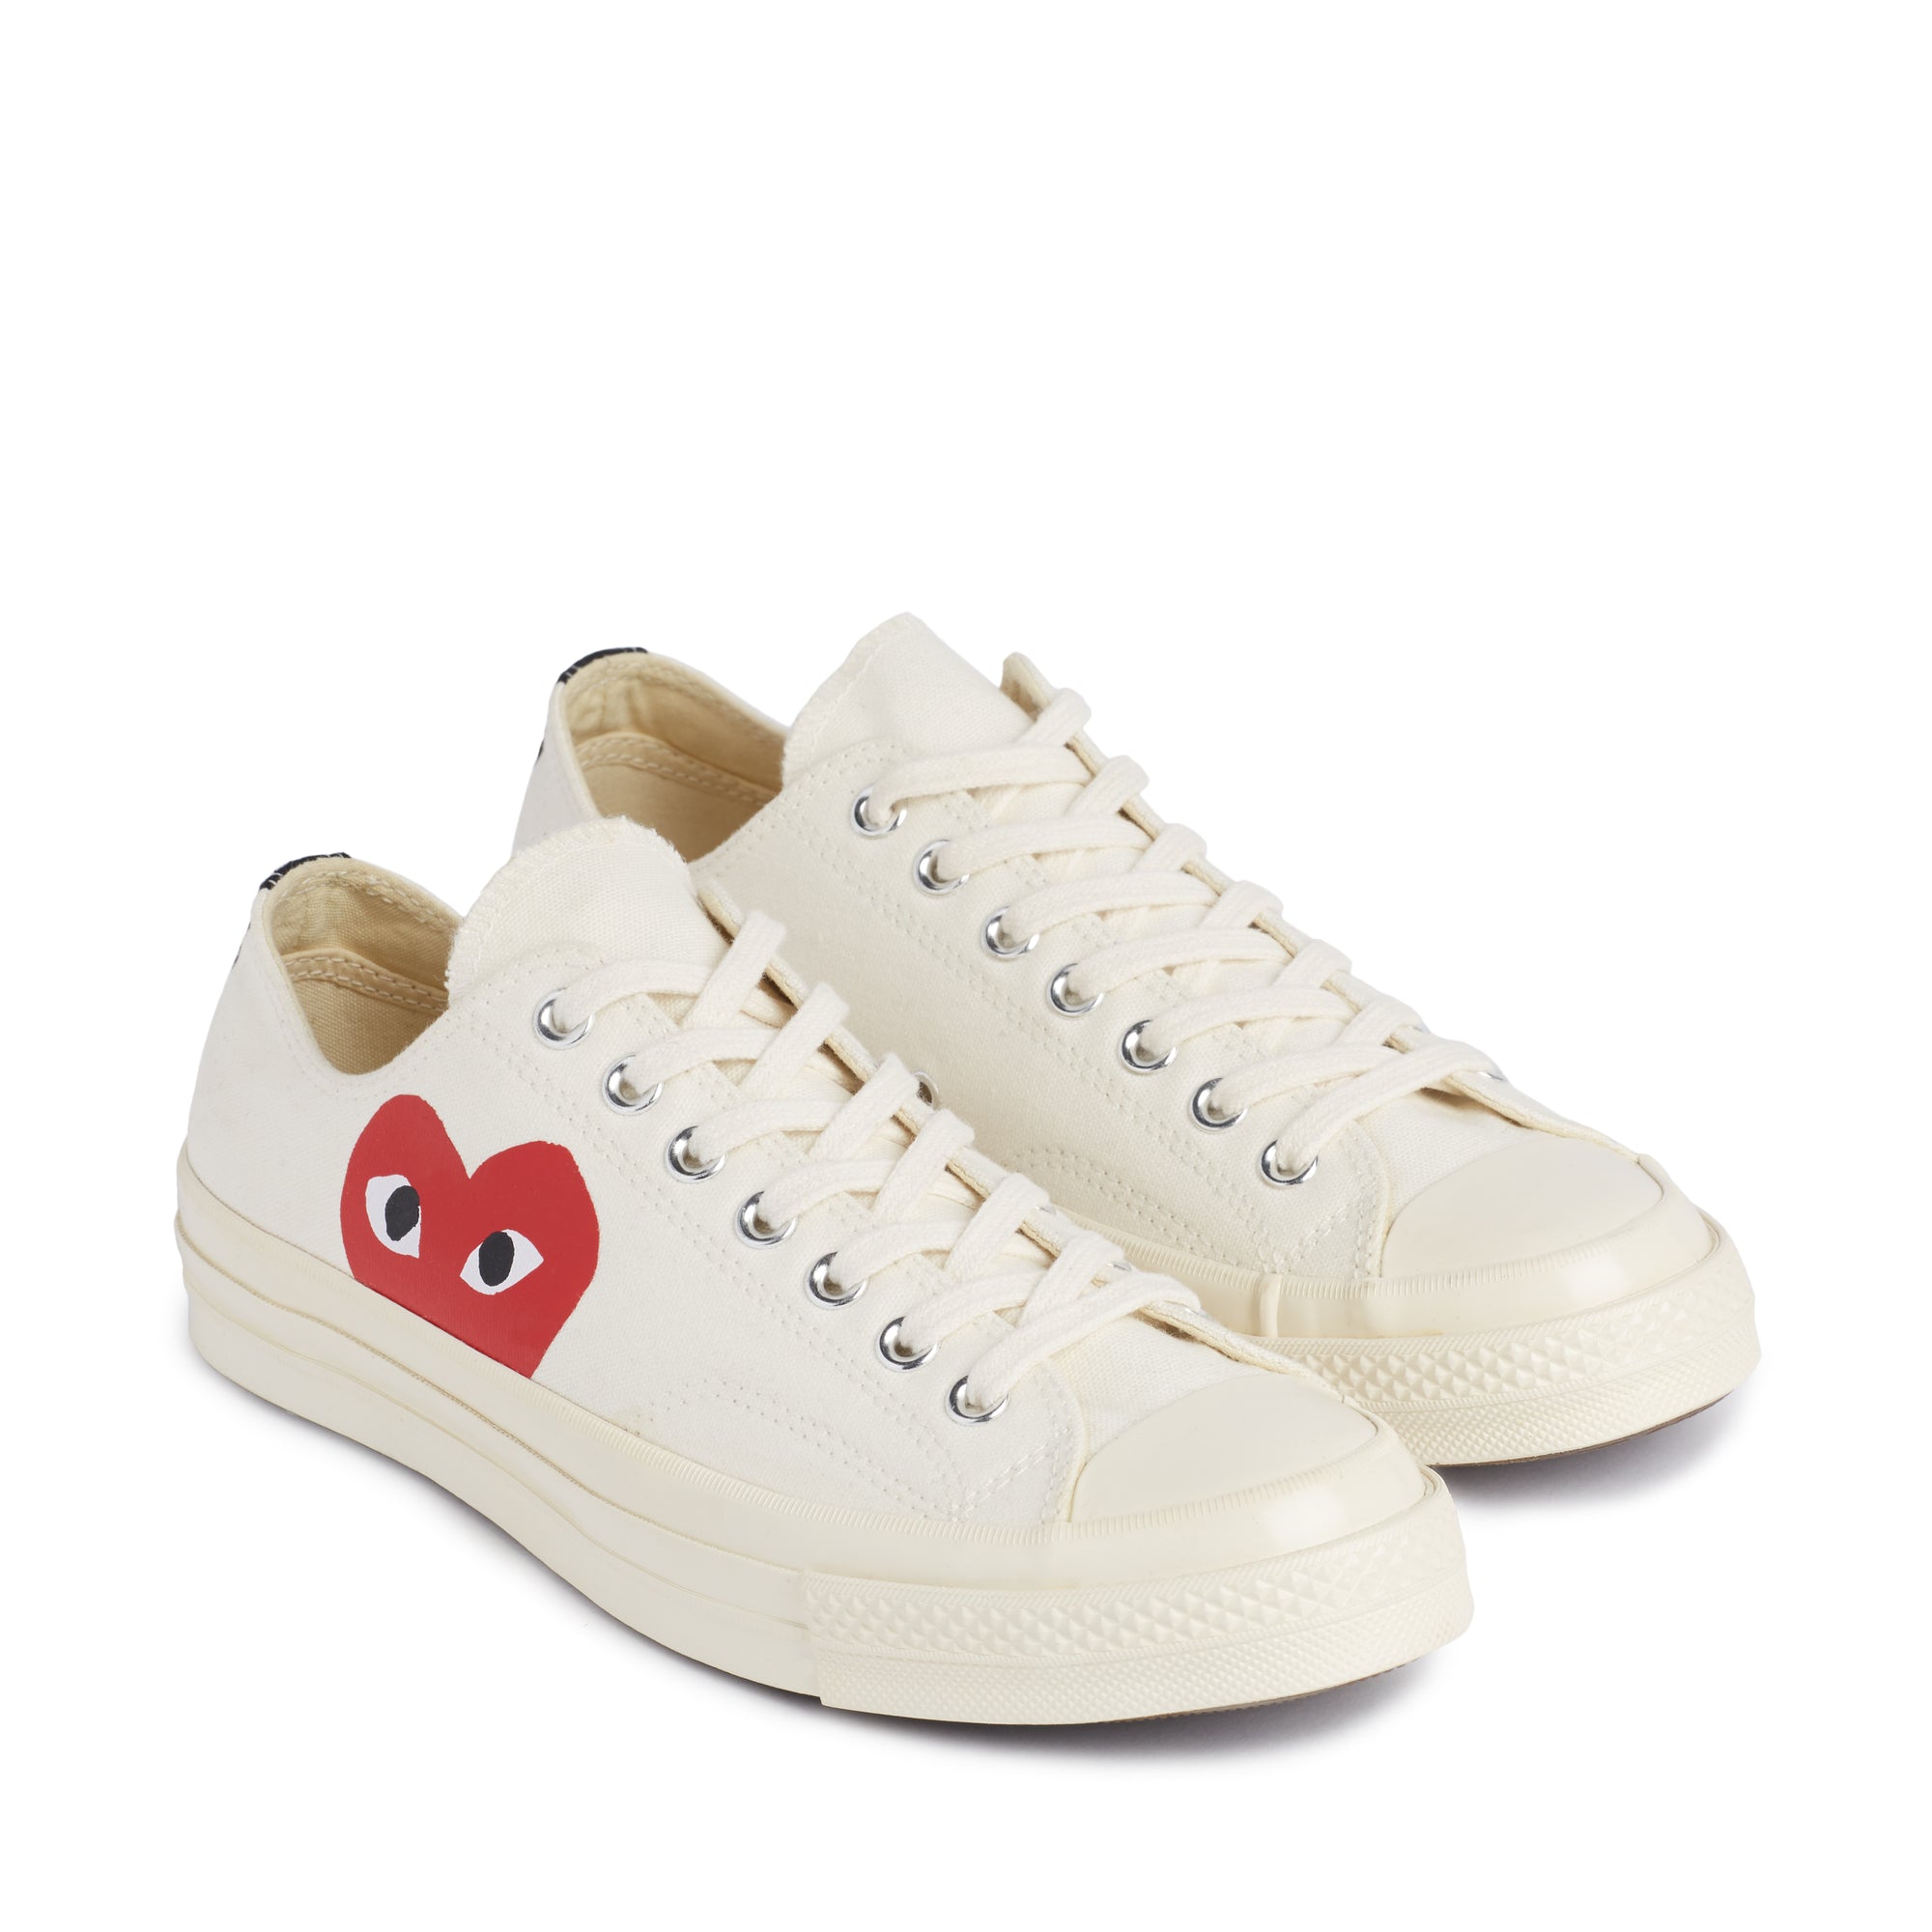 Comme des Play x Converse Chuck Taylor 70s Ox - White & Red Heart | Dover Street Market E-Shop – DSML